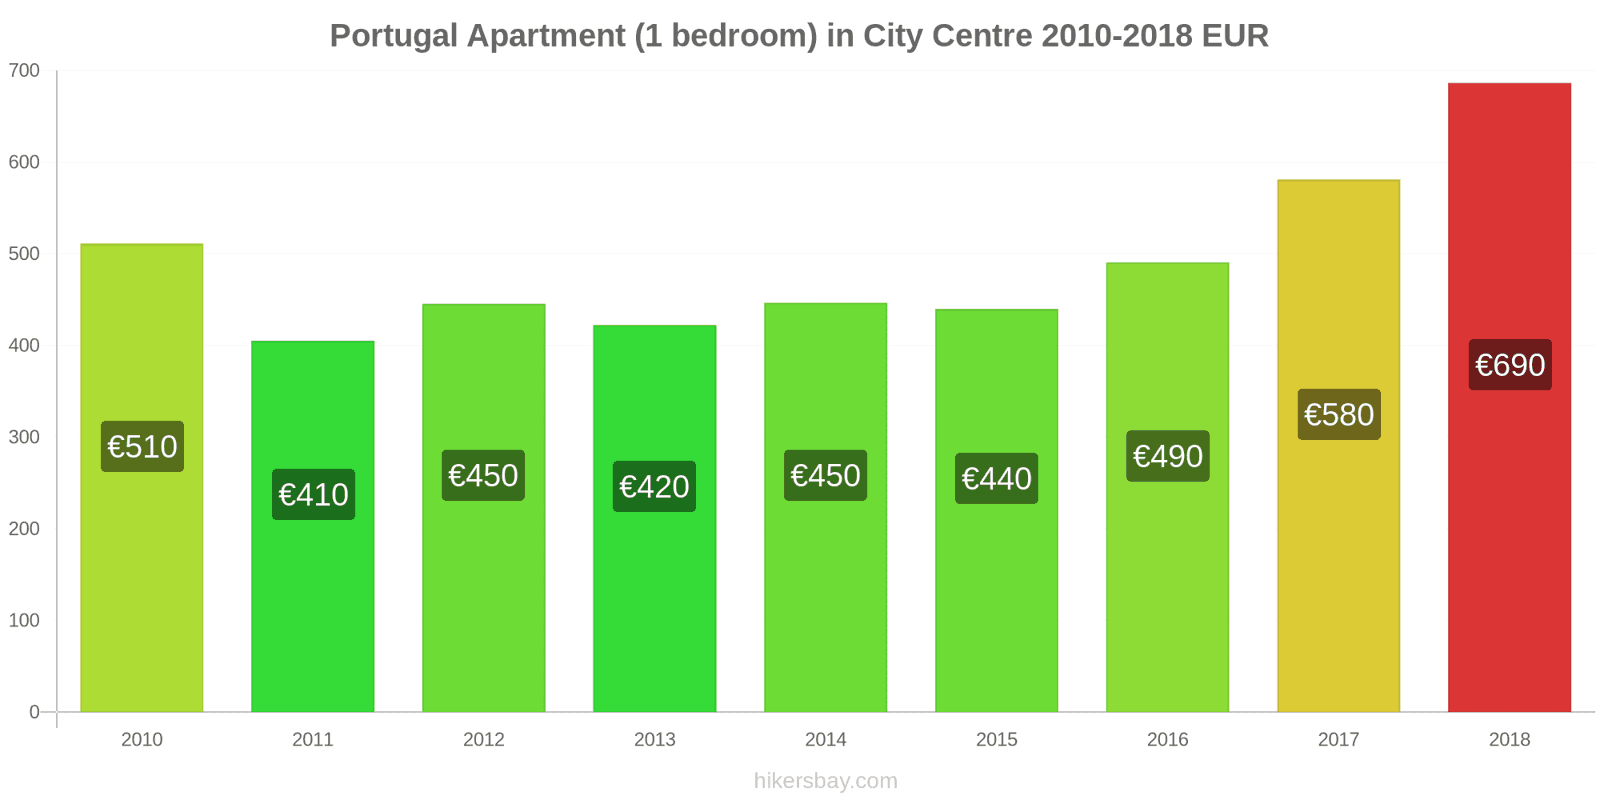 Portugal price changes Apartment (1 bedroom) in city centre hikersbay.com